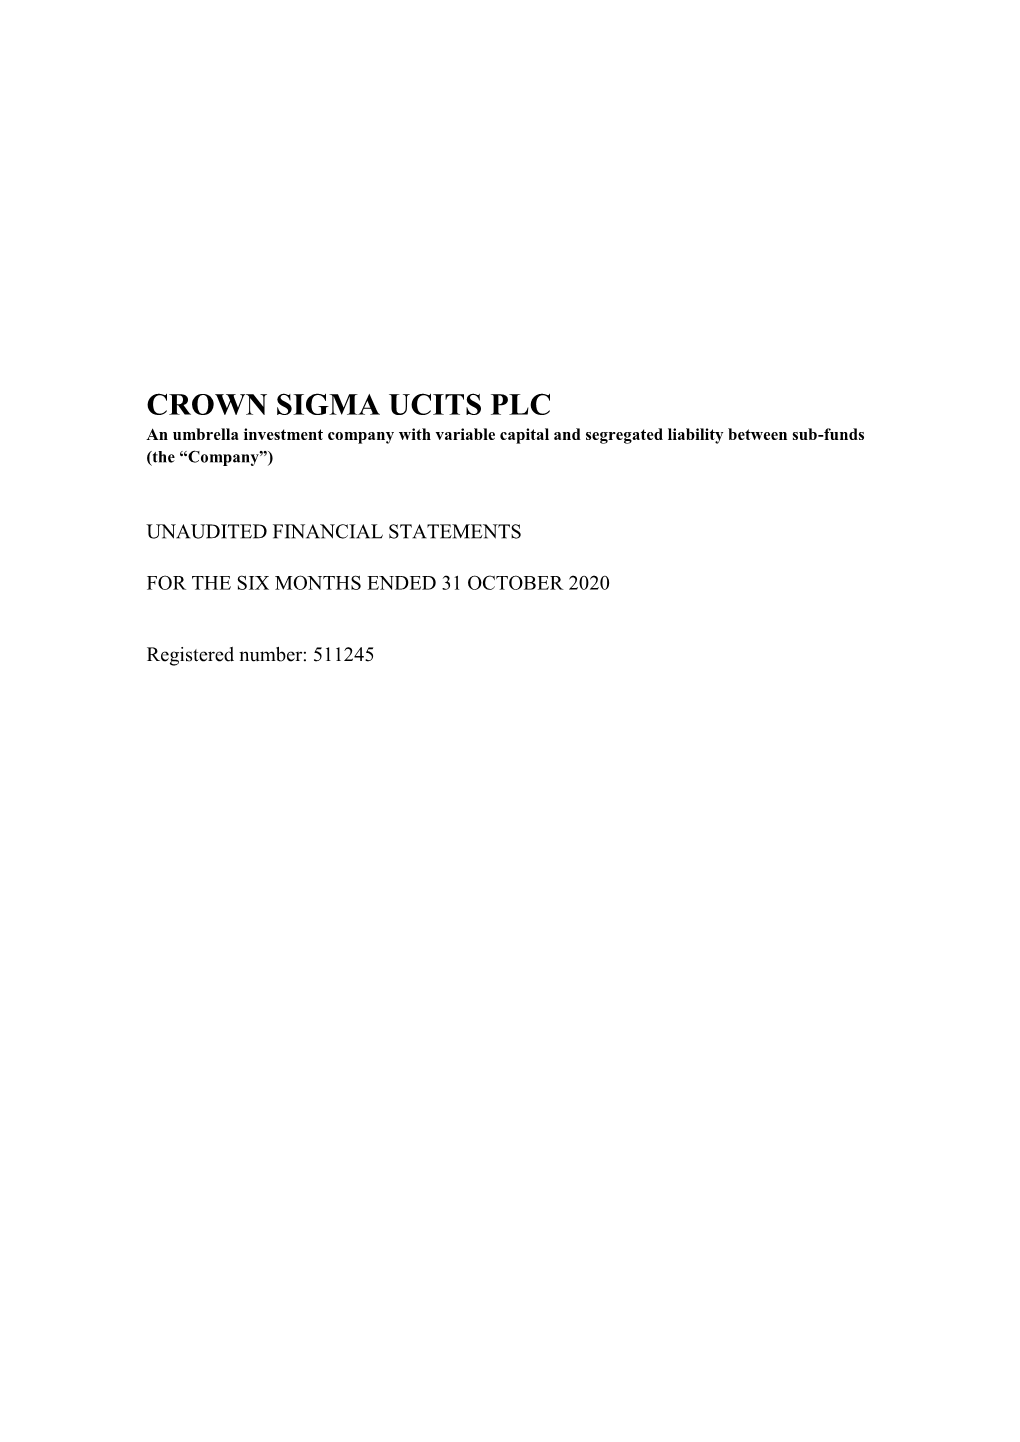 CROWN SIGMA UCITS PLC an Umbrella Investment Company with Variable Capital and Segregated Liability Between Sub-Funds (The “Company”)